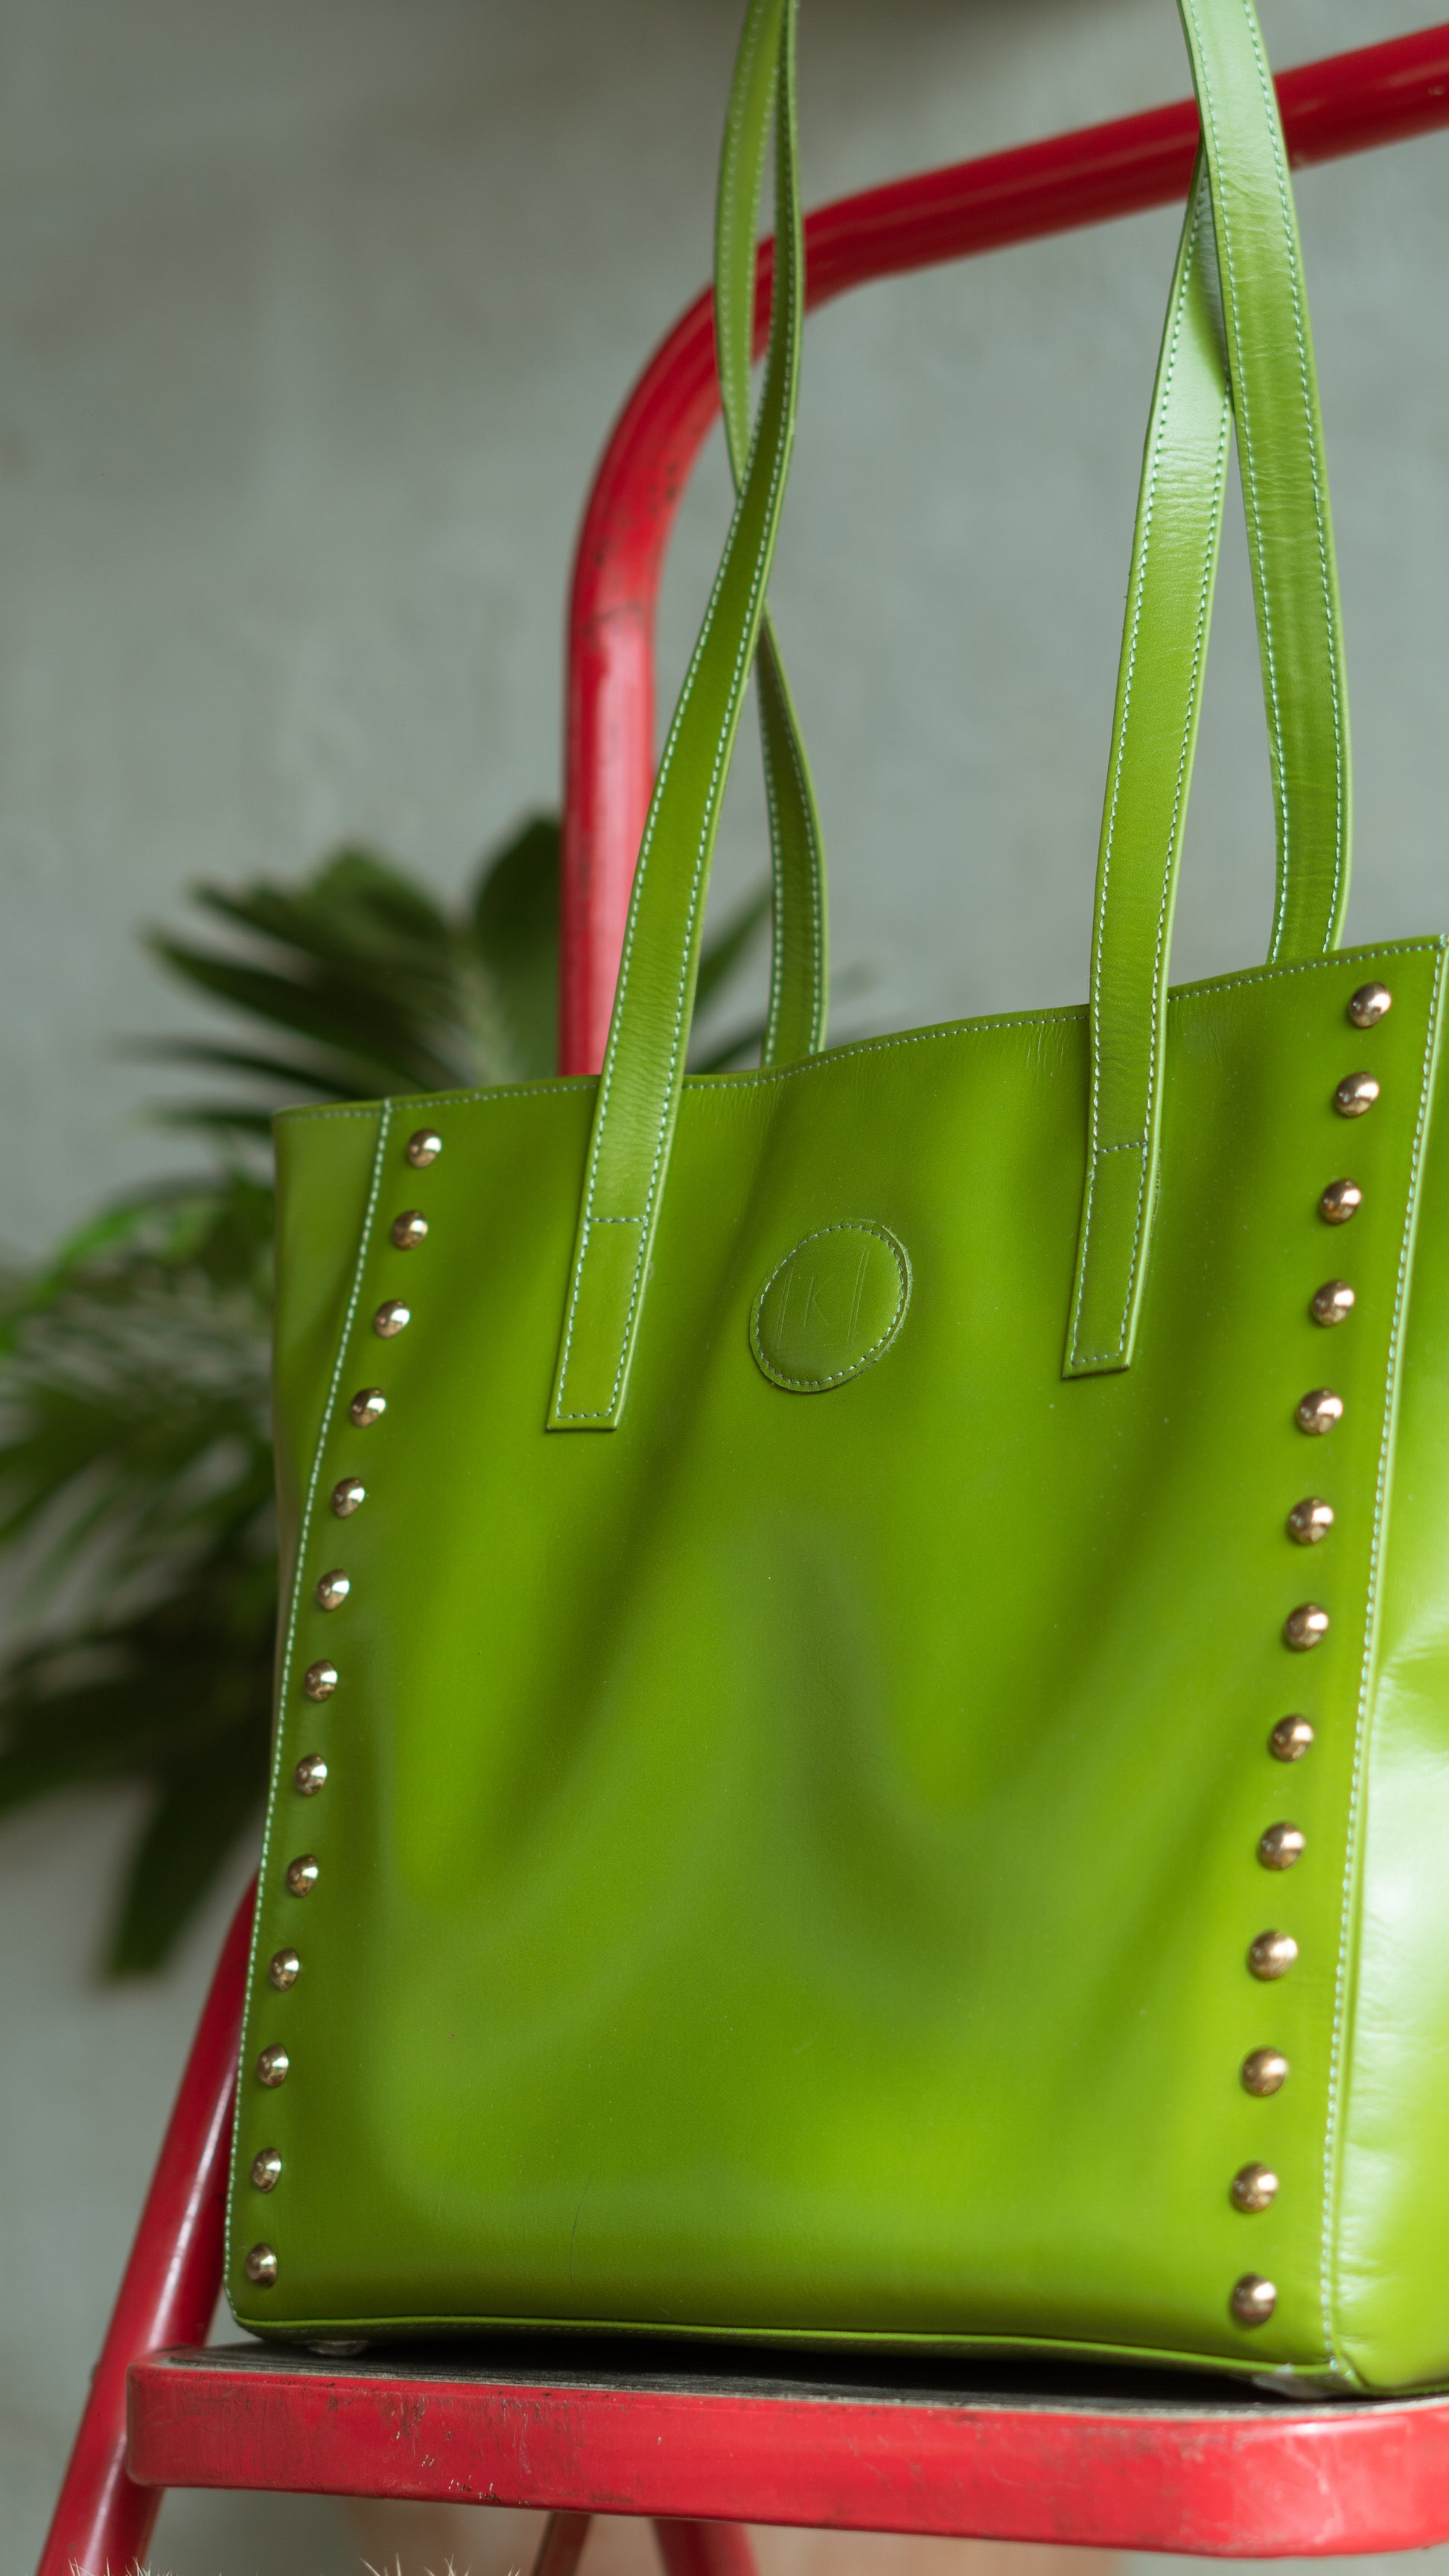  Leather Green Tote Bag